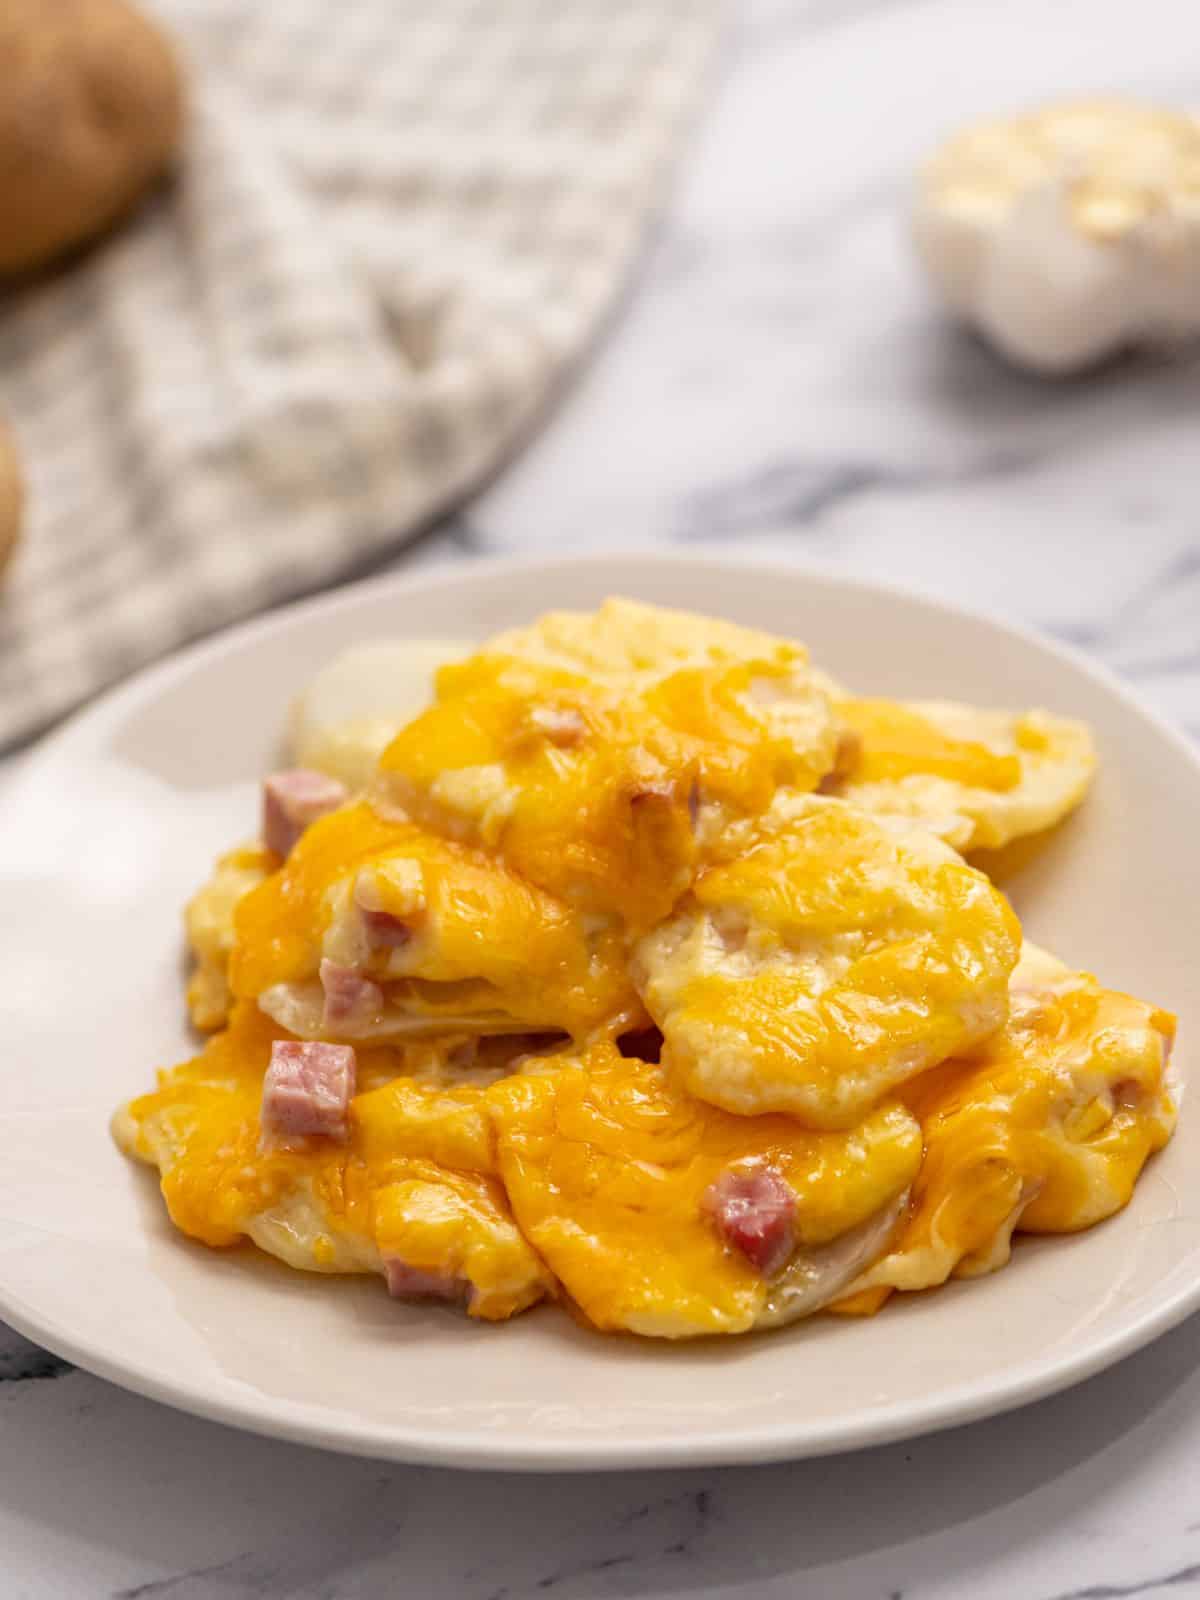 Plate with scalloped potatoes, cheese, and ham.